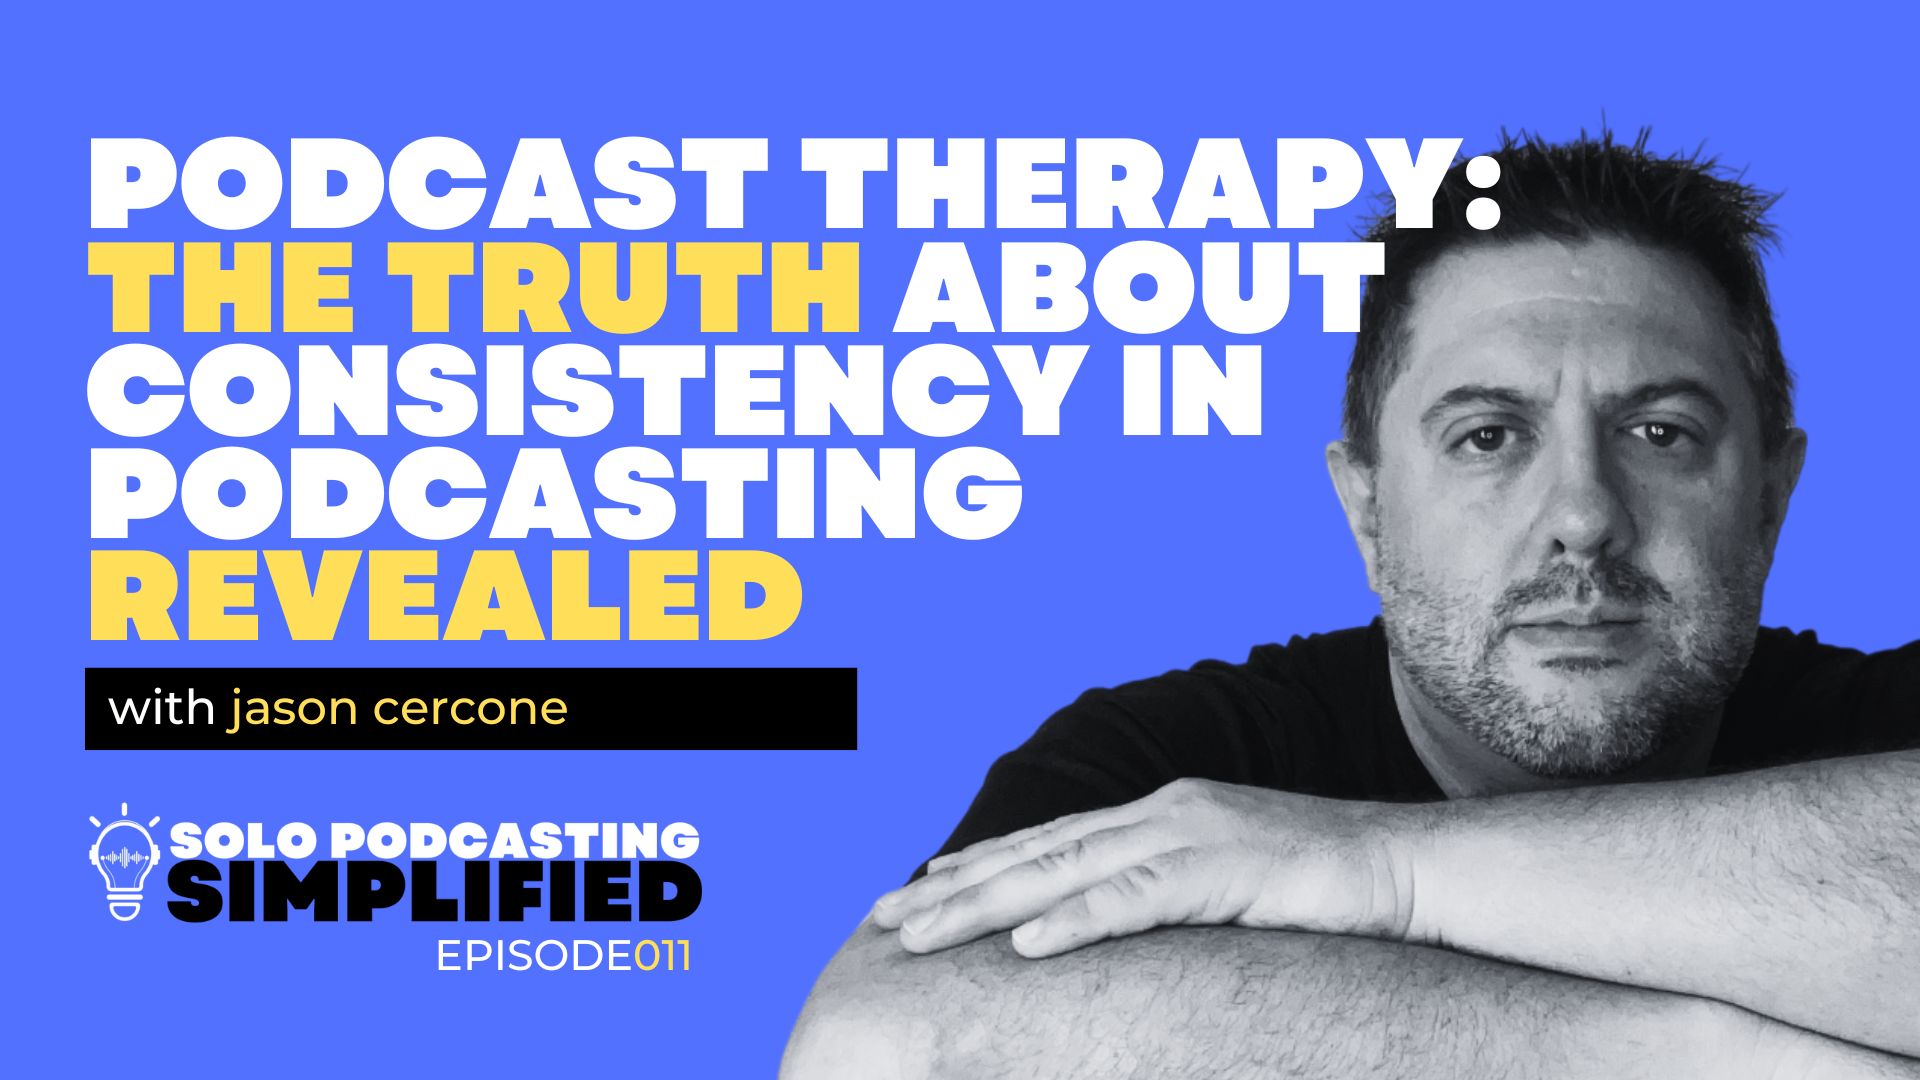 The truth about consistency in podcasting is revealed in Episode 011 of Solo Podcasting Simplified!